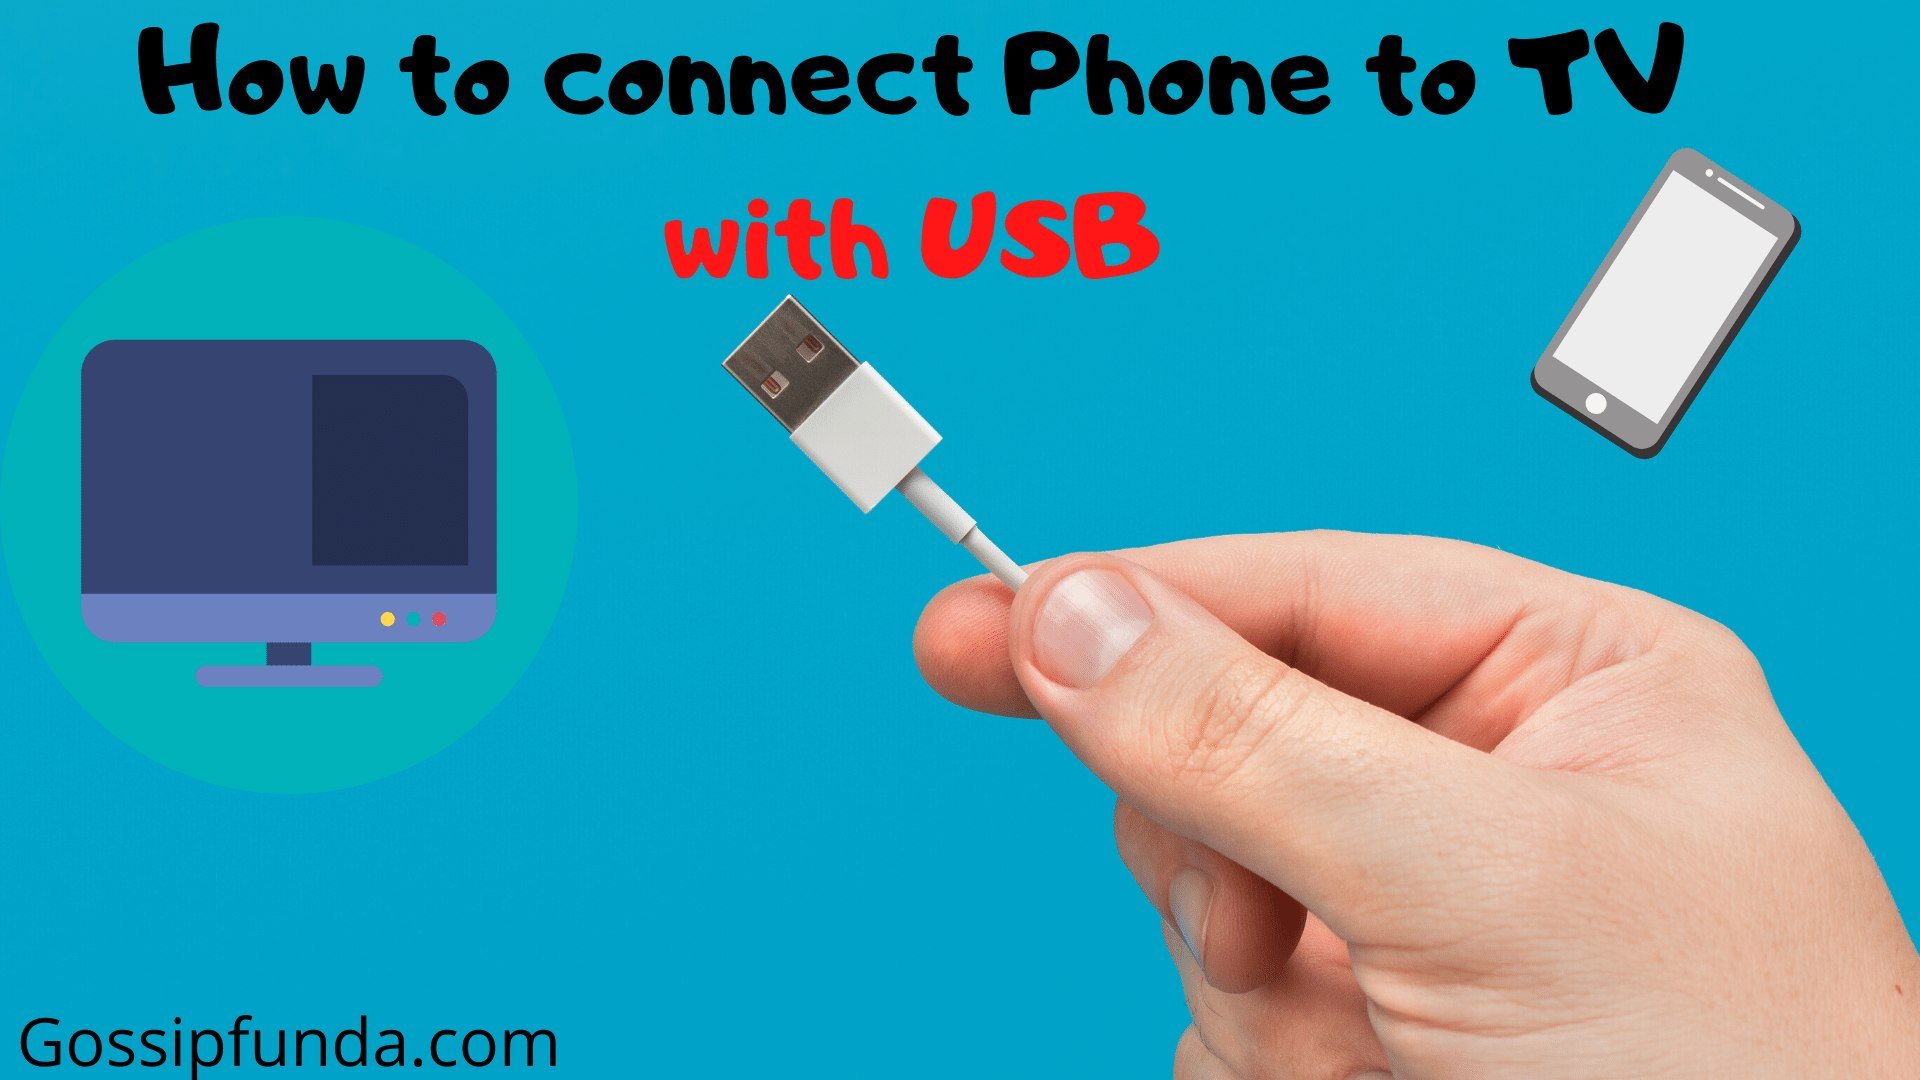 How to connect Phone to TV with USB?